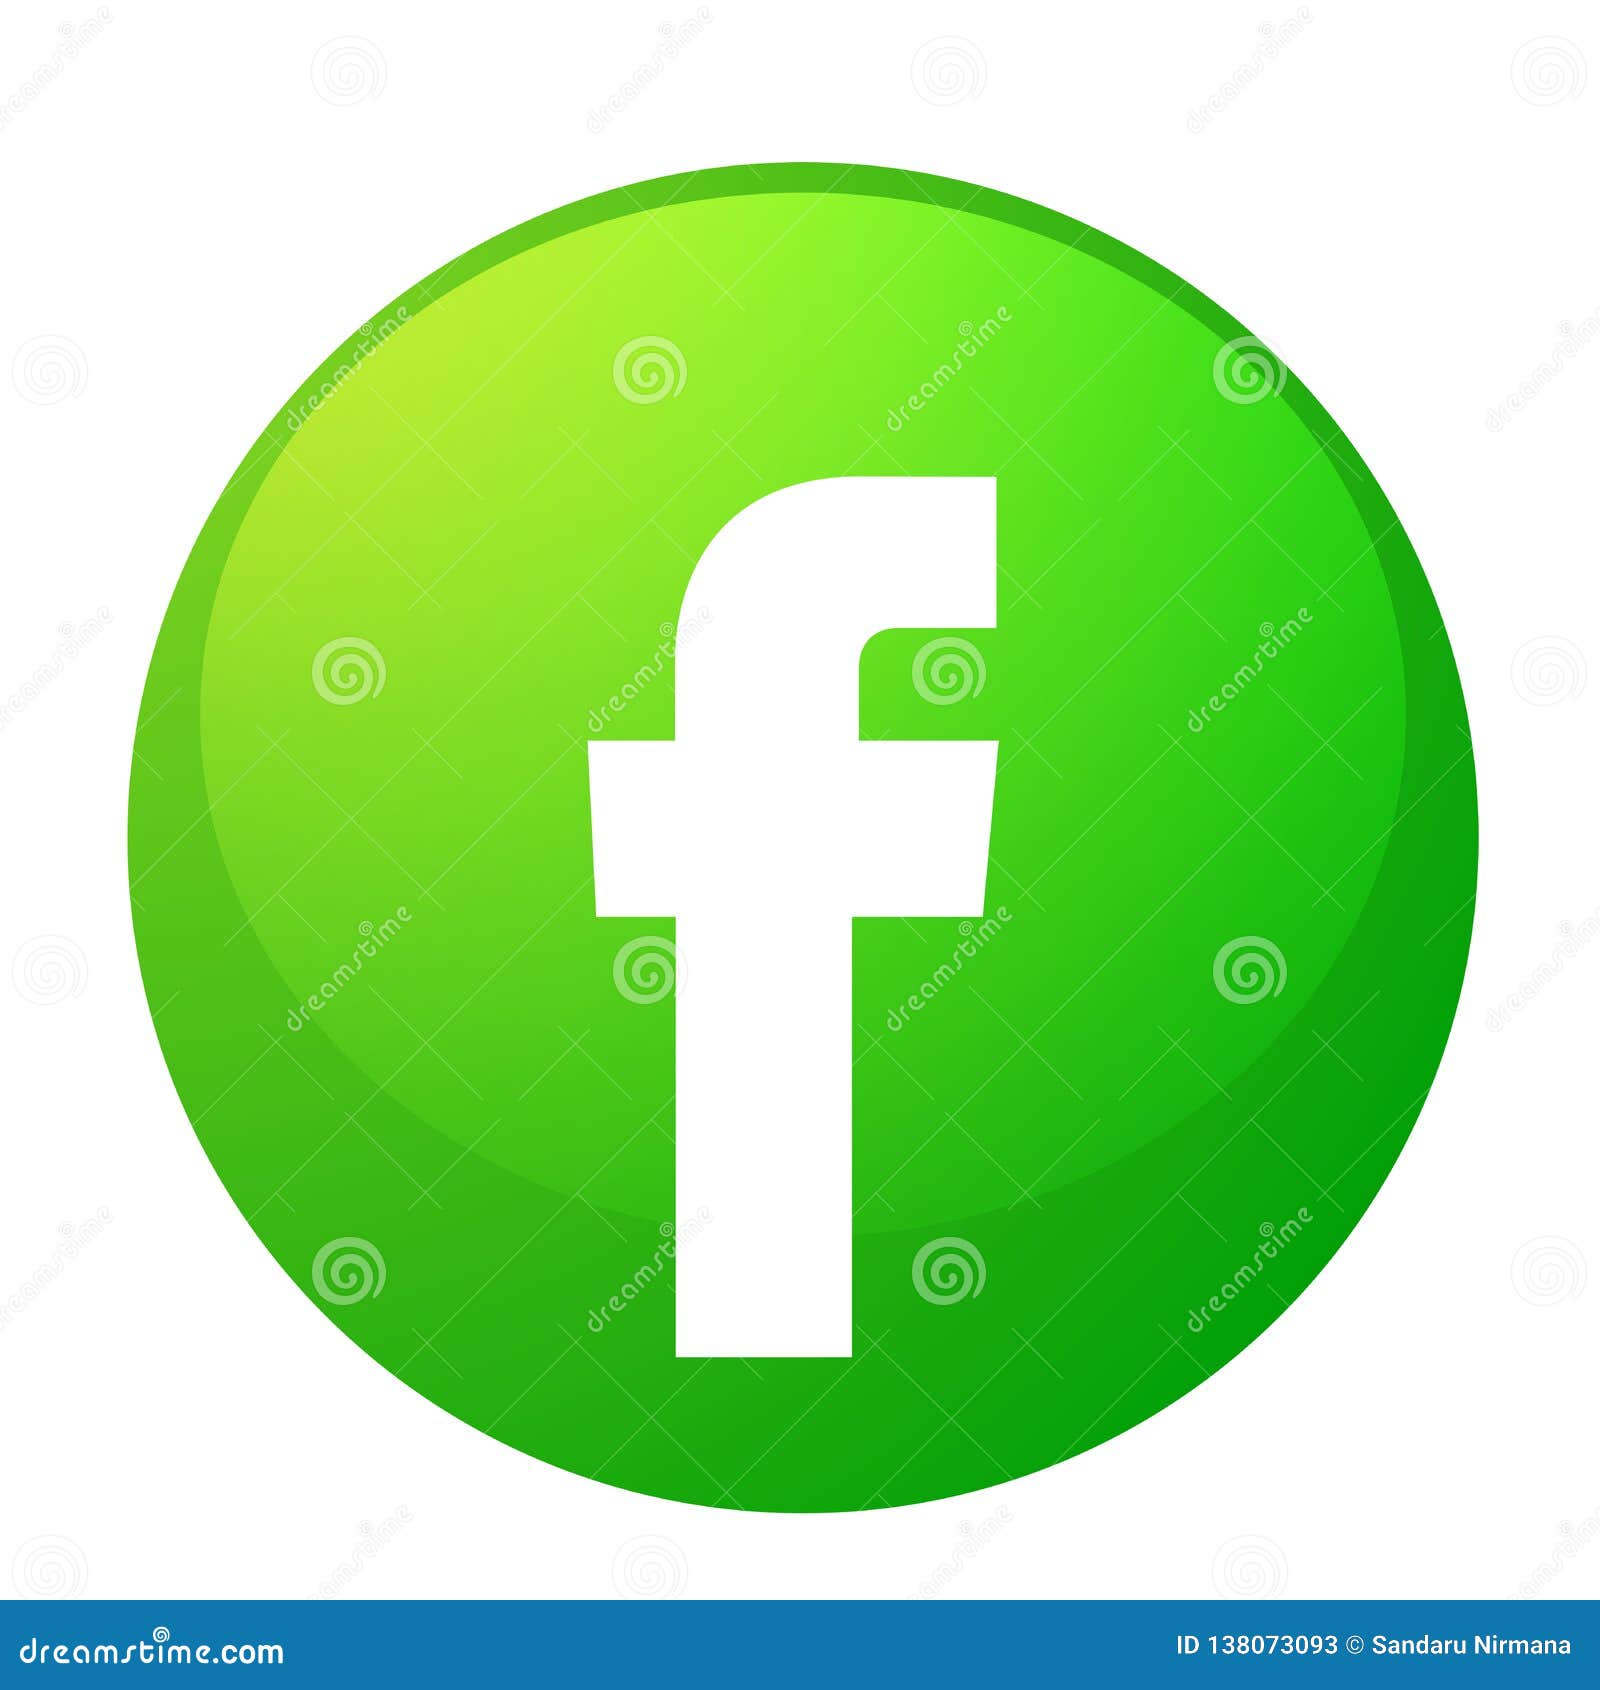 Facebook Logo Icon Vector In Green Illustrations On White Background Editorial Stock Photo Illustration Of Buttons Illustrations